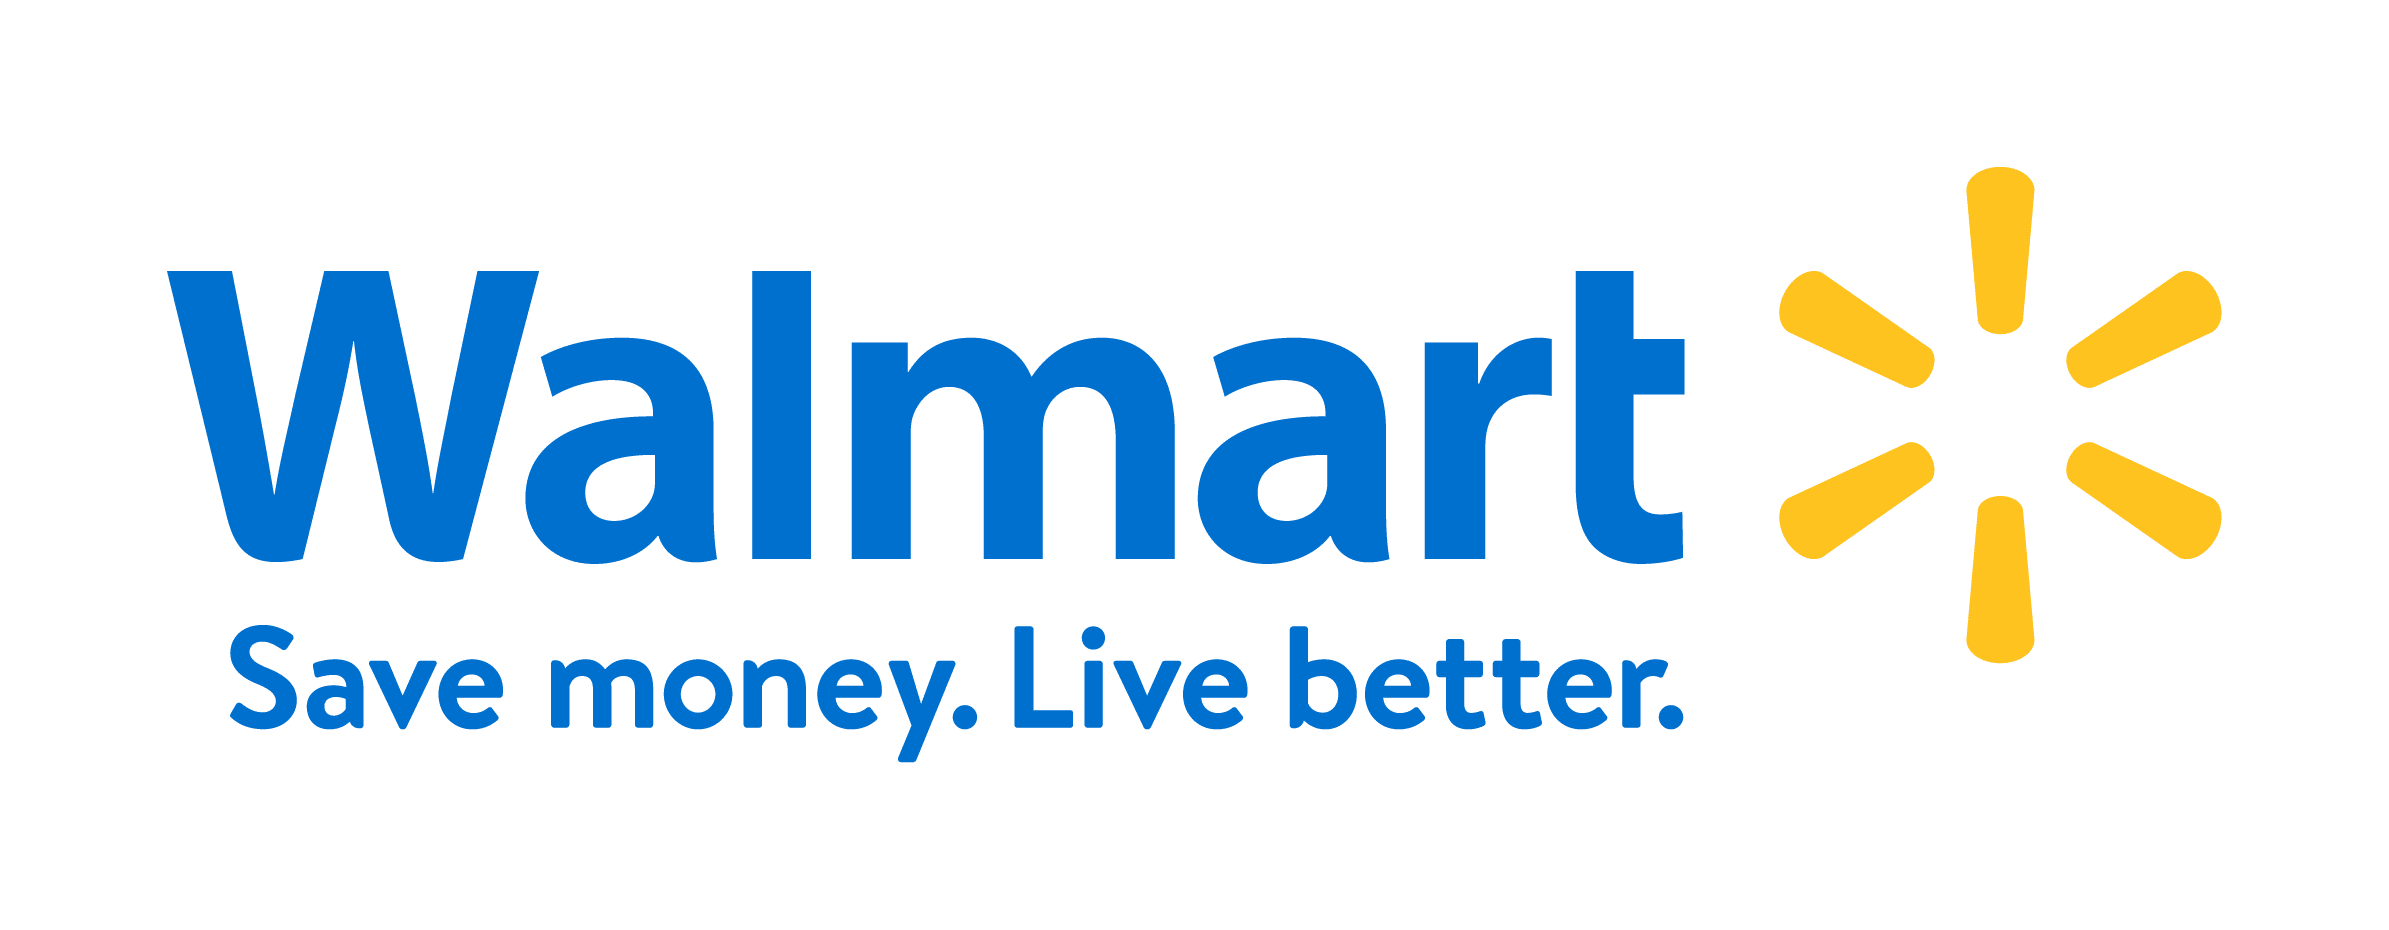 The walmart logo with the words save money better.